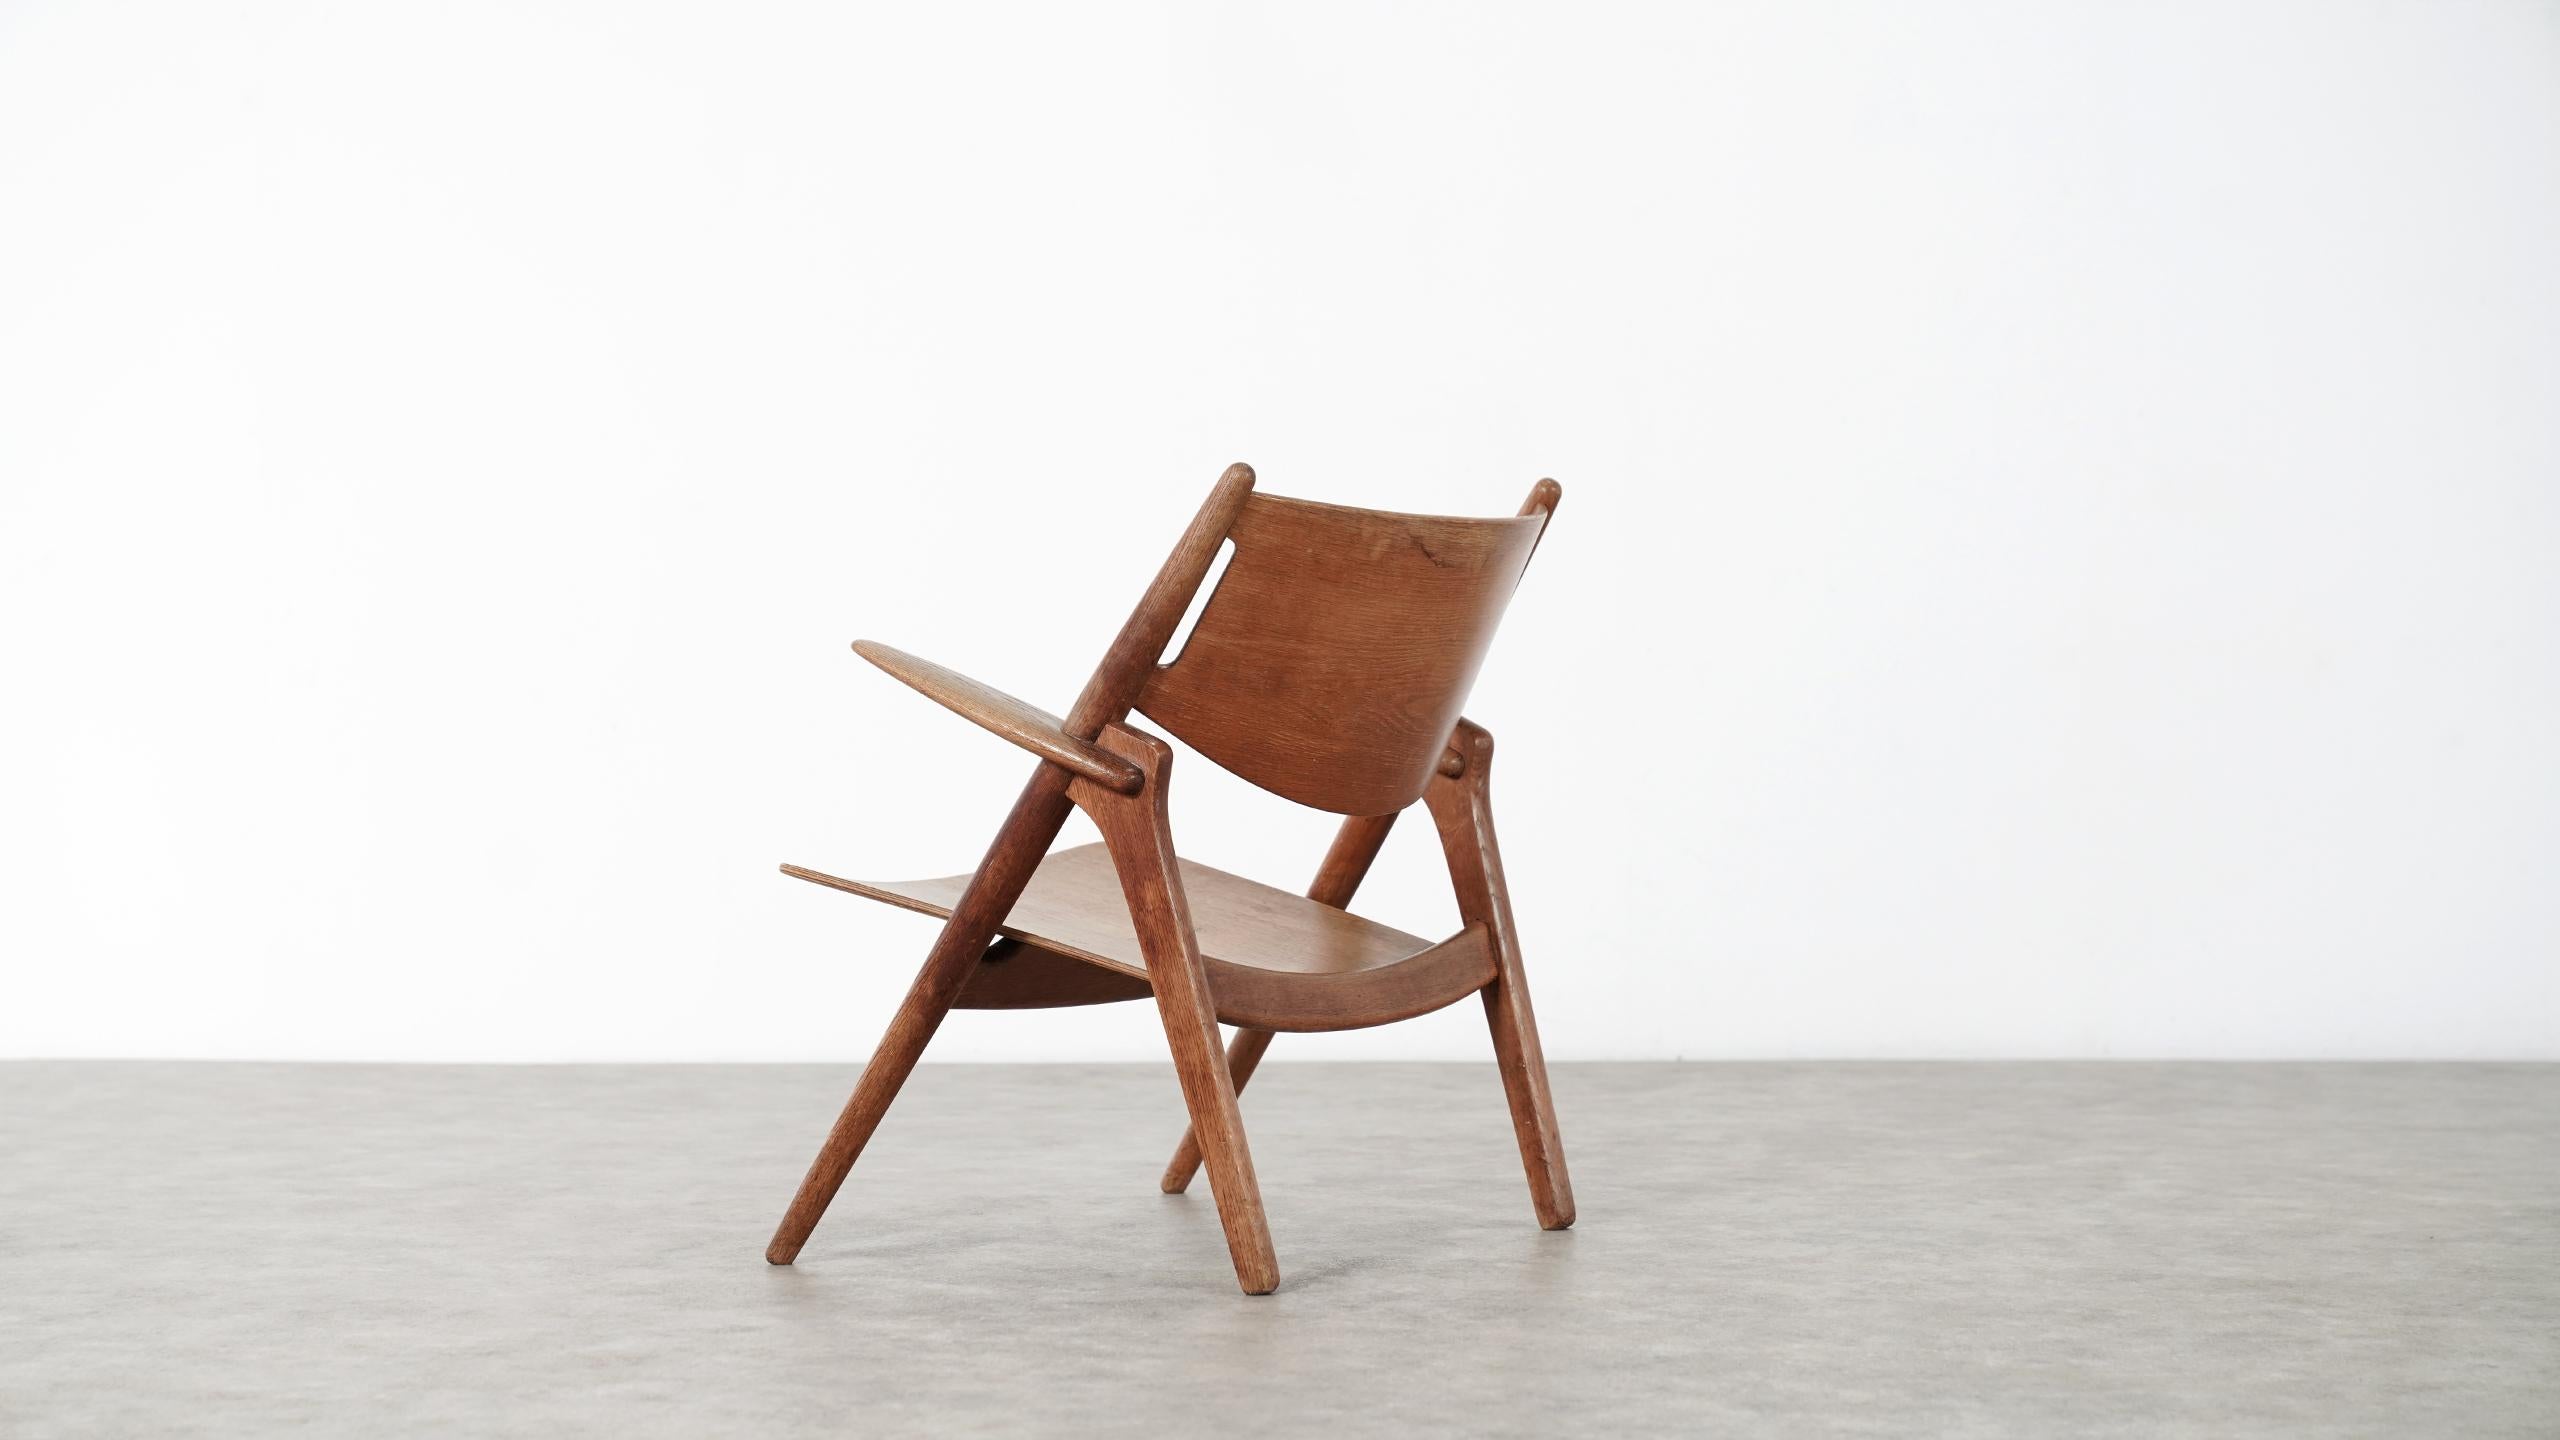 Hans J. Wegner - Sawbuck chair CH-28
1951 for Carl Hansen, Denmark.

Amazing and early lounge chair model CH-28, or Sawbuck chair designed by Hans J. Wegner for Carl Hansen, Denmark 1951.
Beautiful old chair in solid oak and plywood with